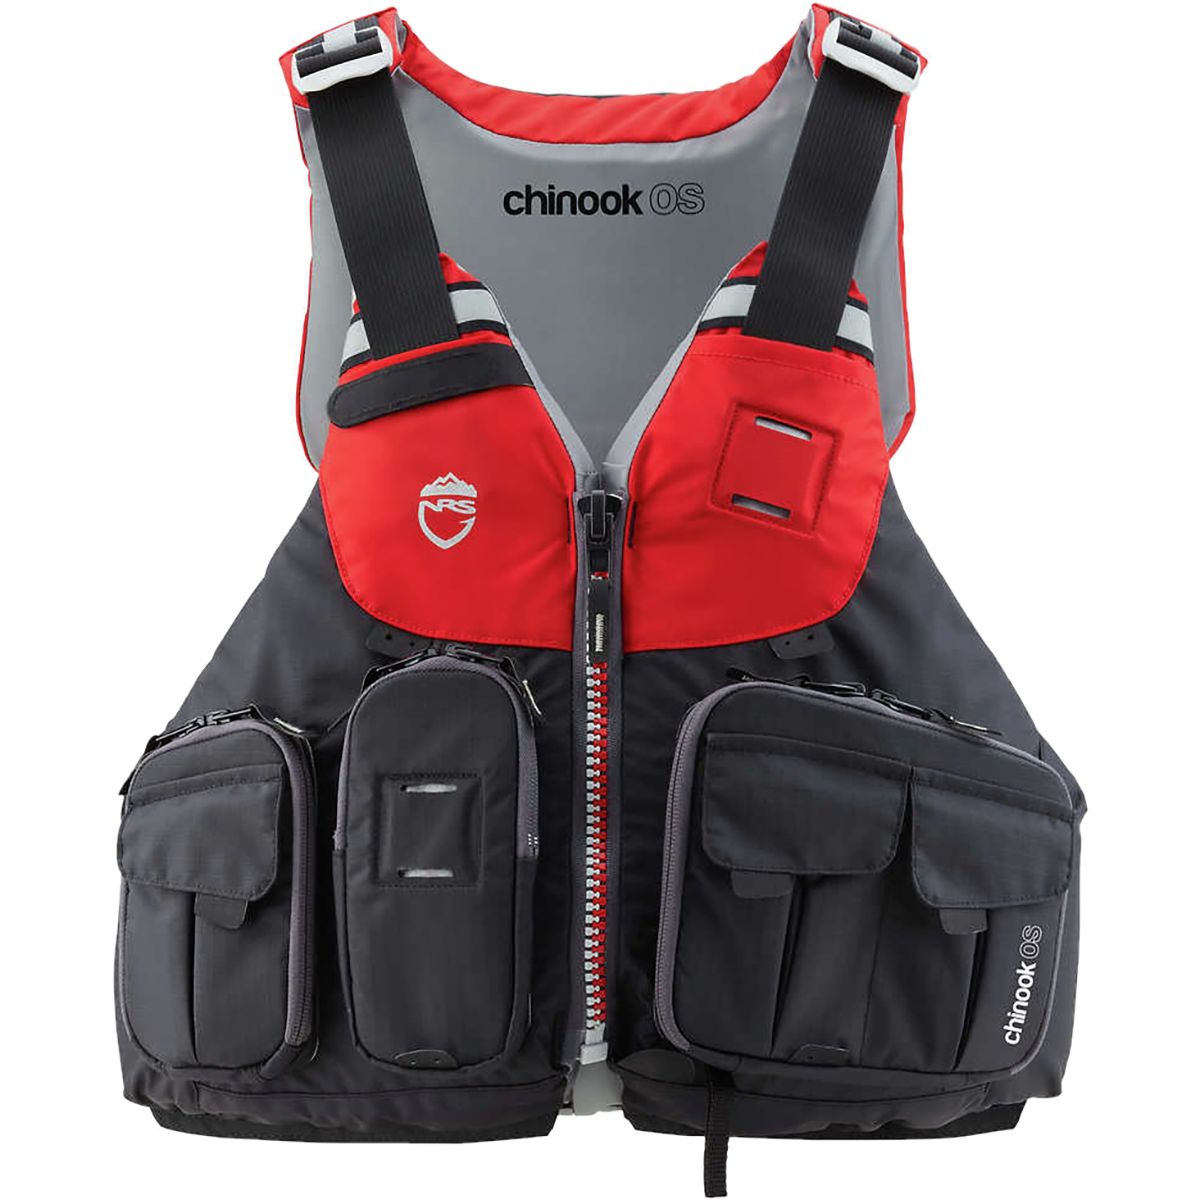 NRS Chinook OS Fishing Personal Flotation Device